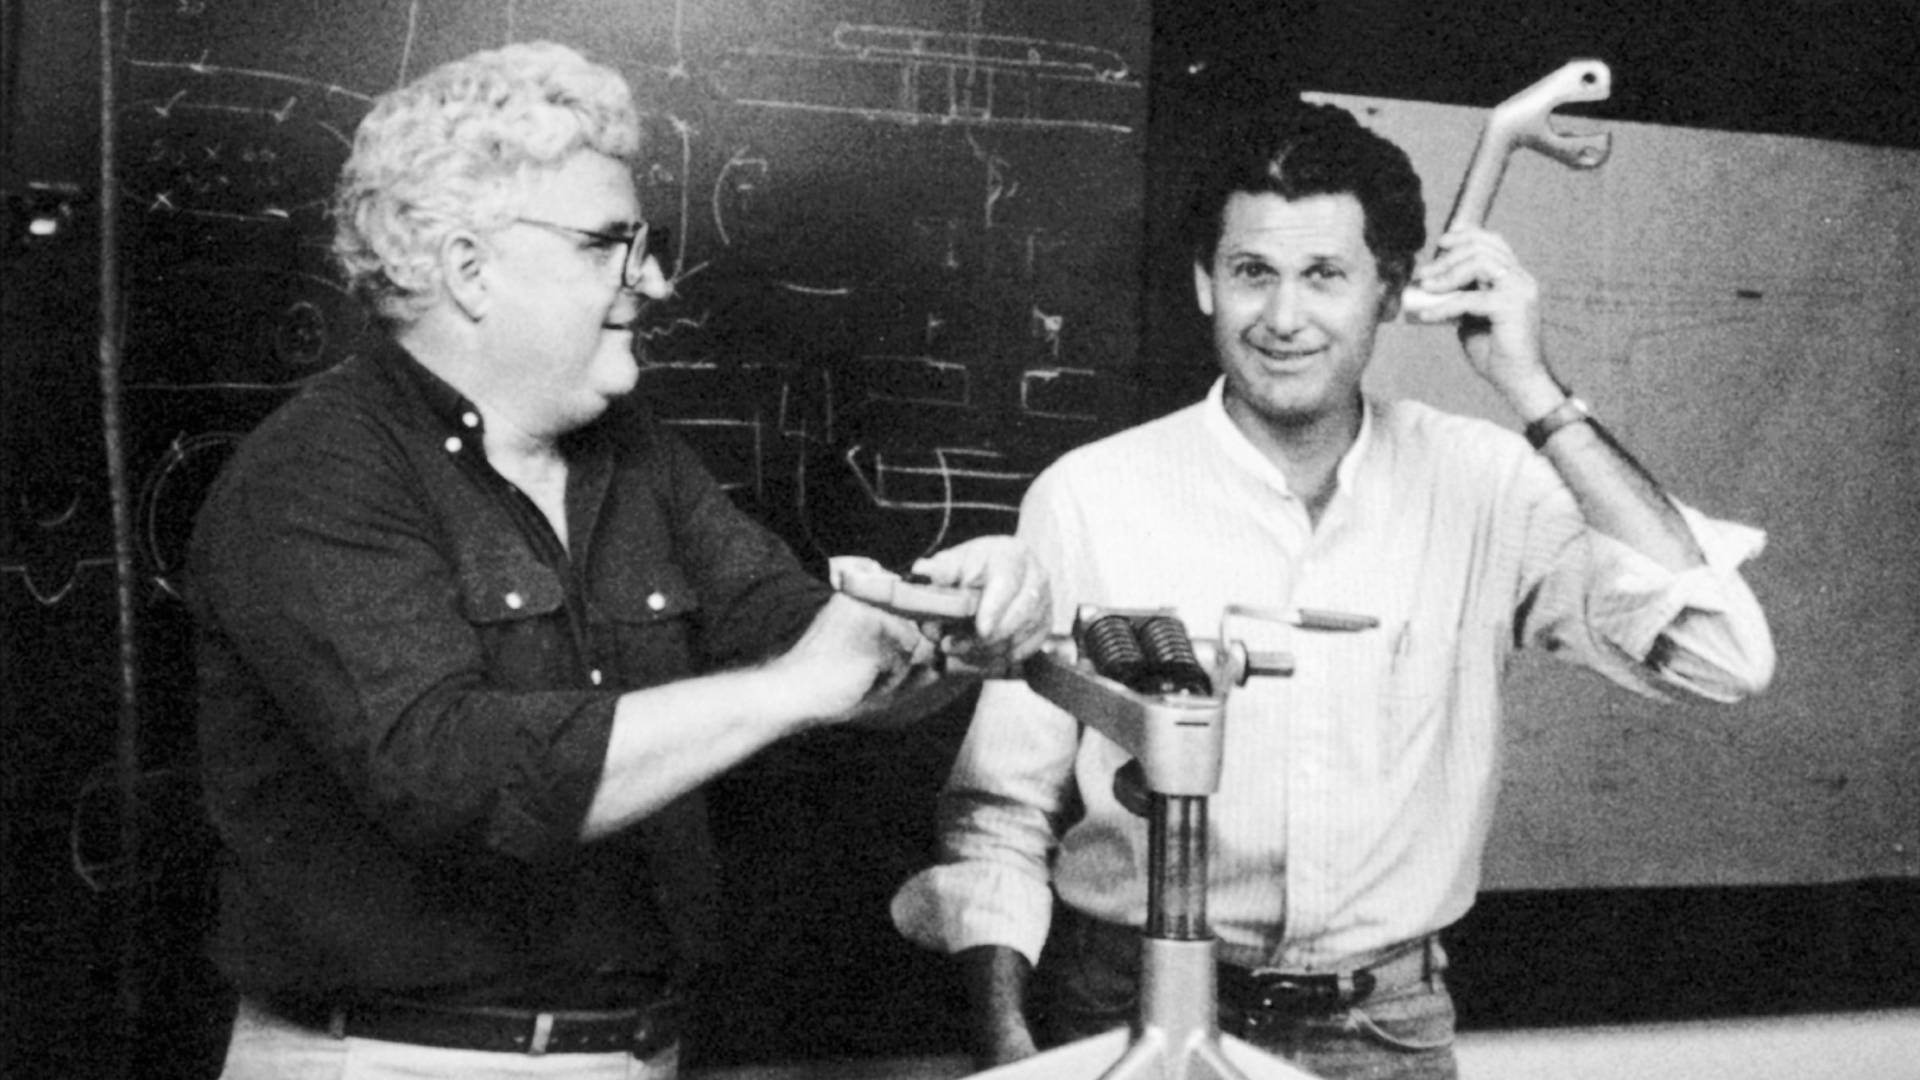 Bill Stumpf and Don Chadwick working on the Ergon chair